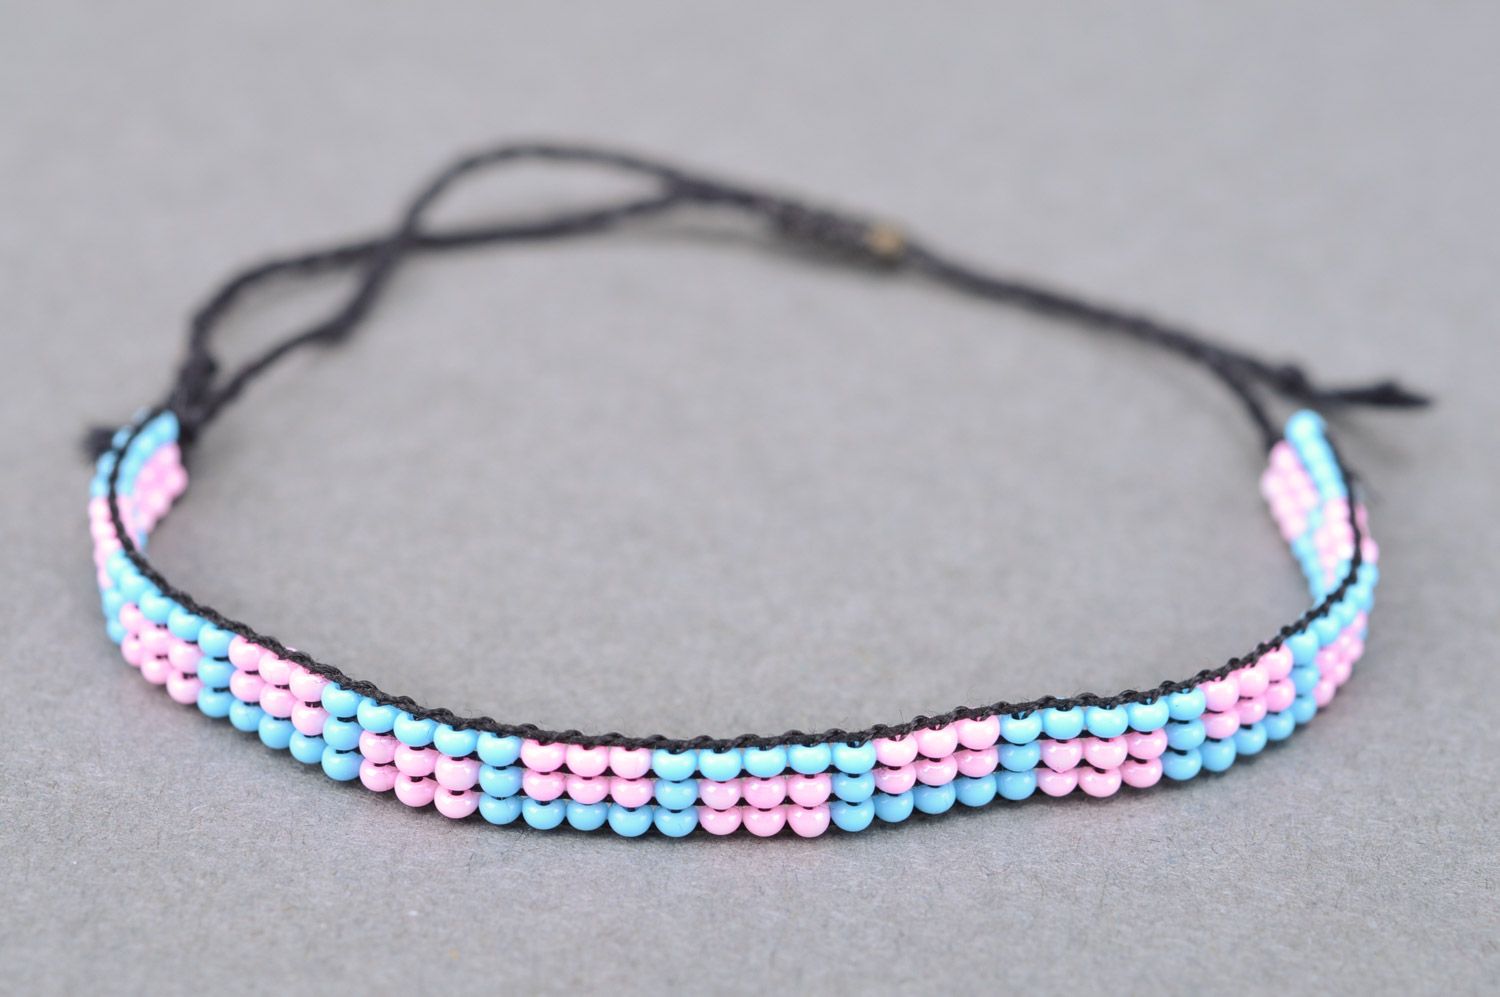 Thin handmade wrist bracelet woven of pink and blue beads with ties for women photo 2